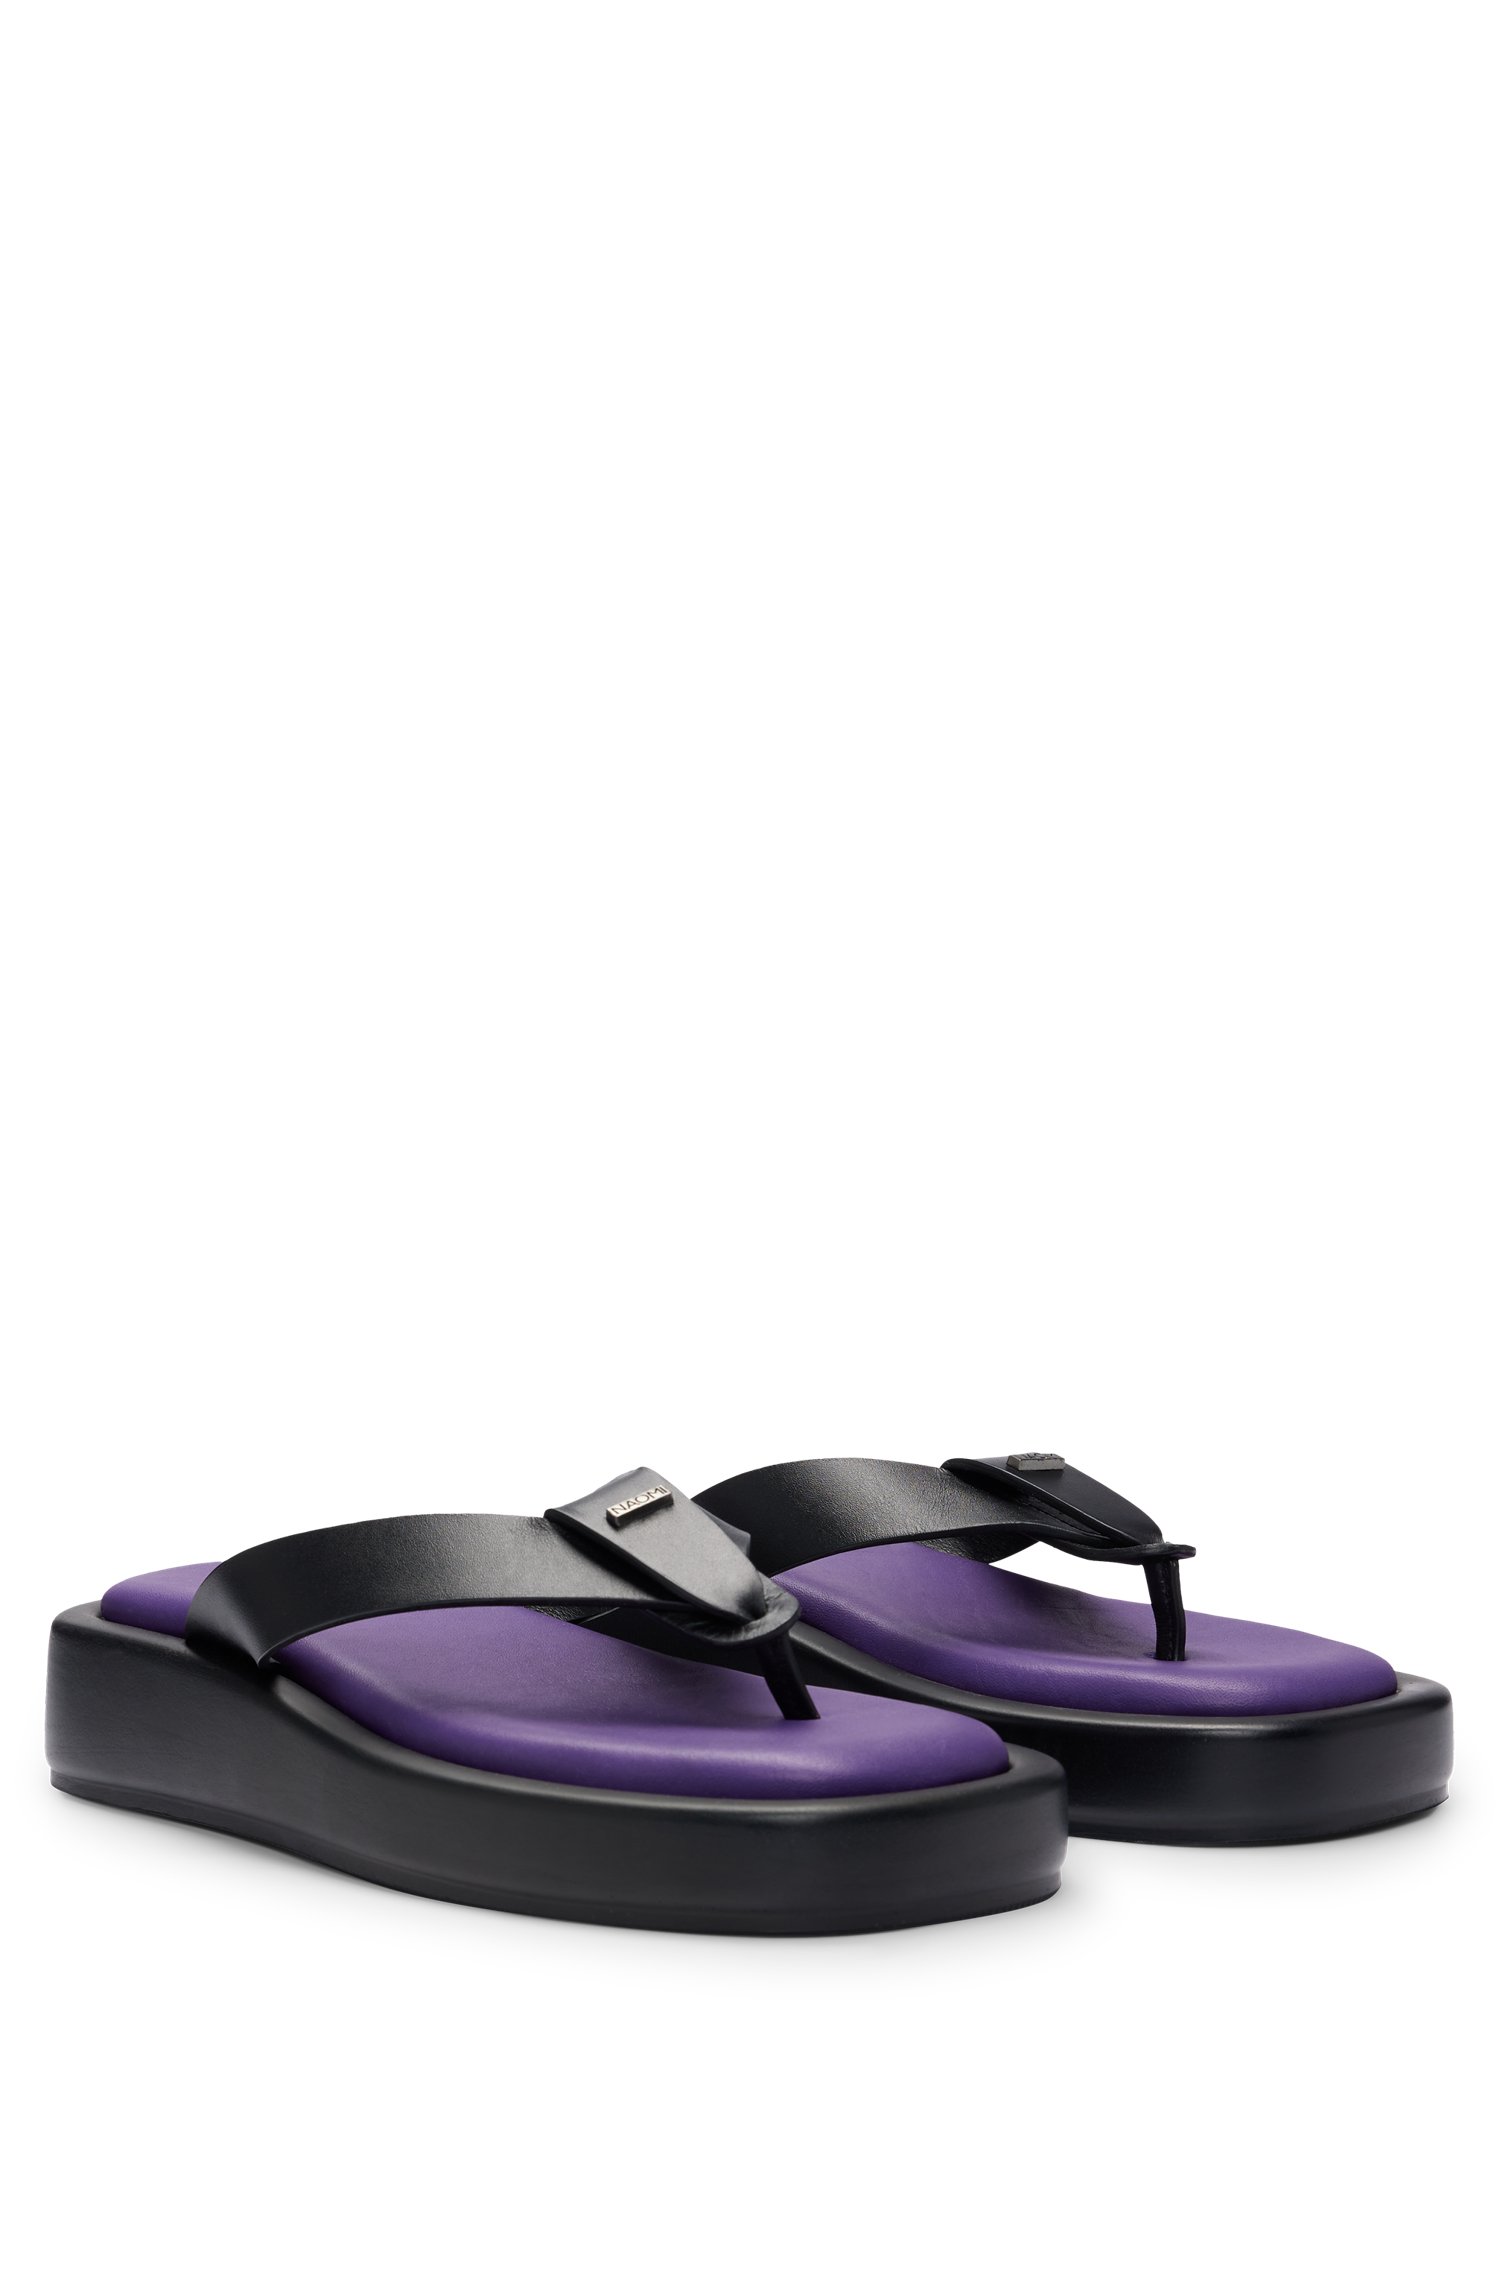 NAOMI x BOSS leather platform thong sandals with branded trim